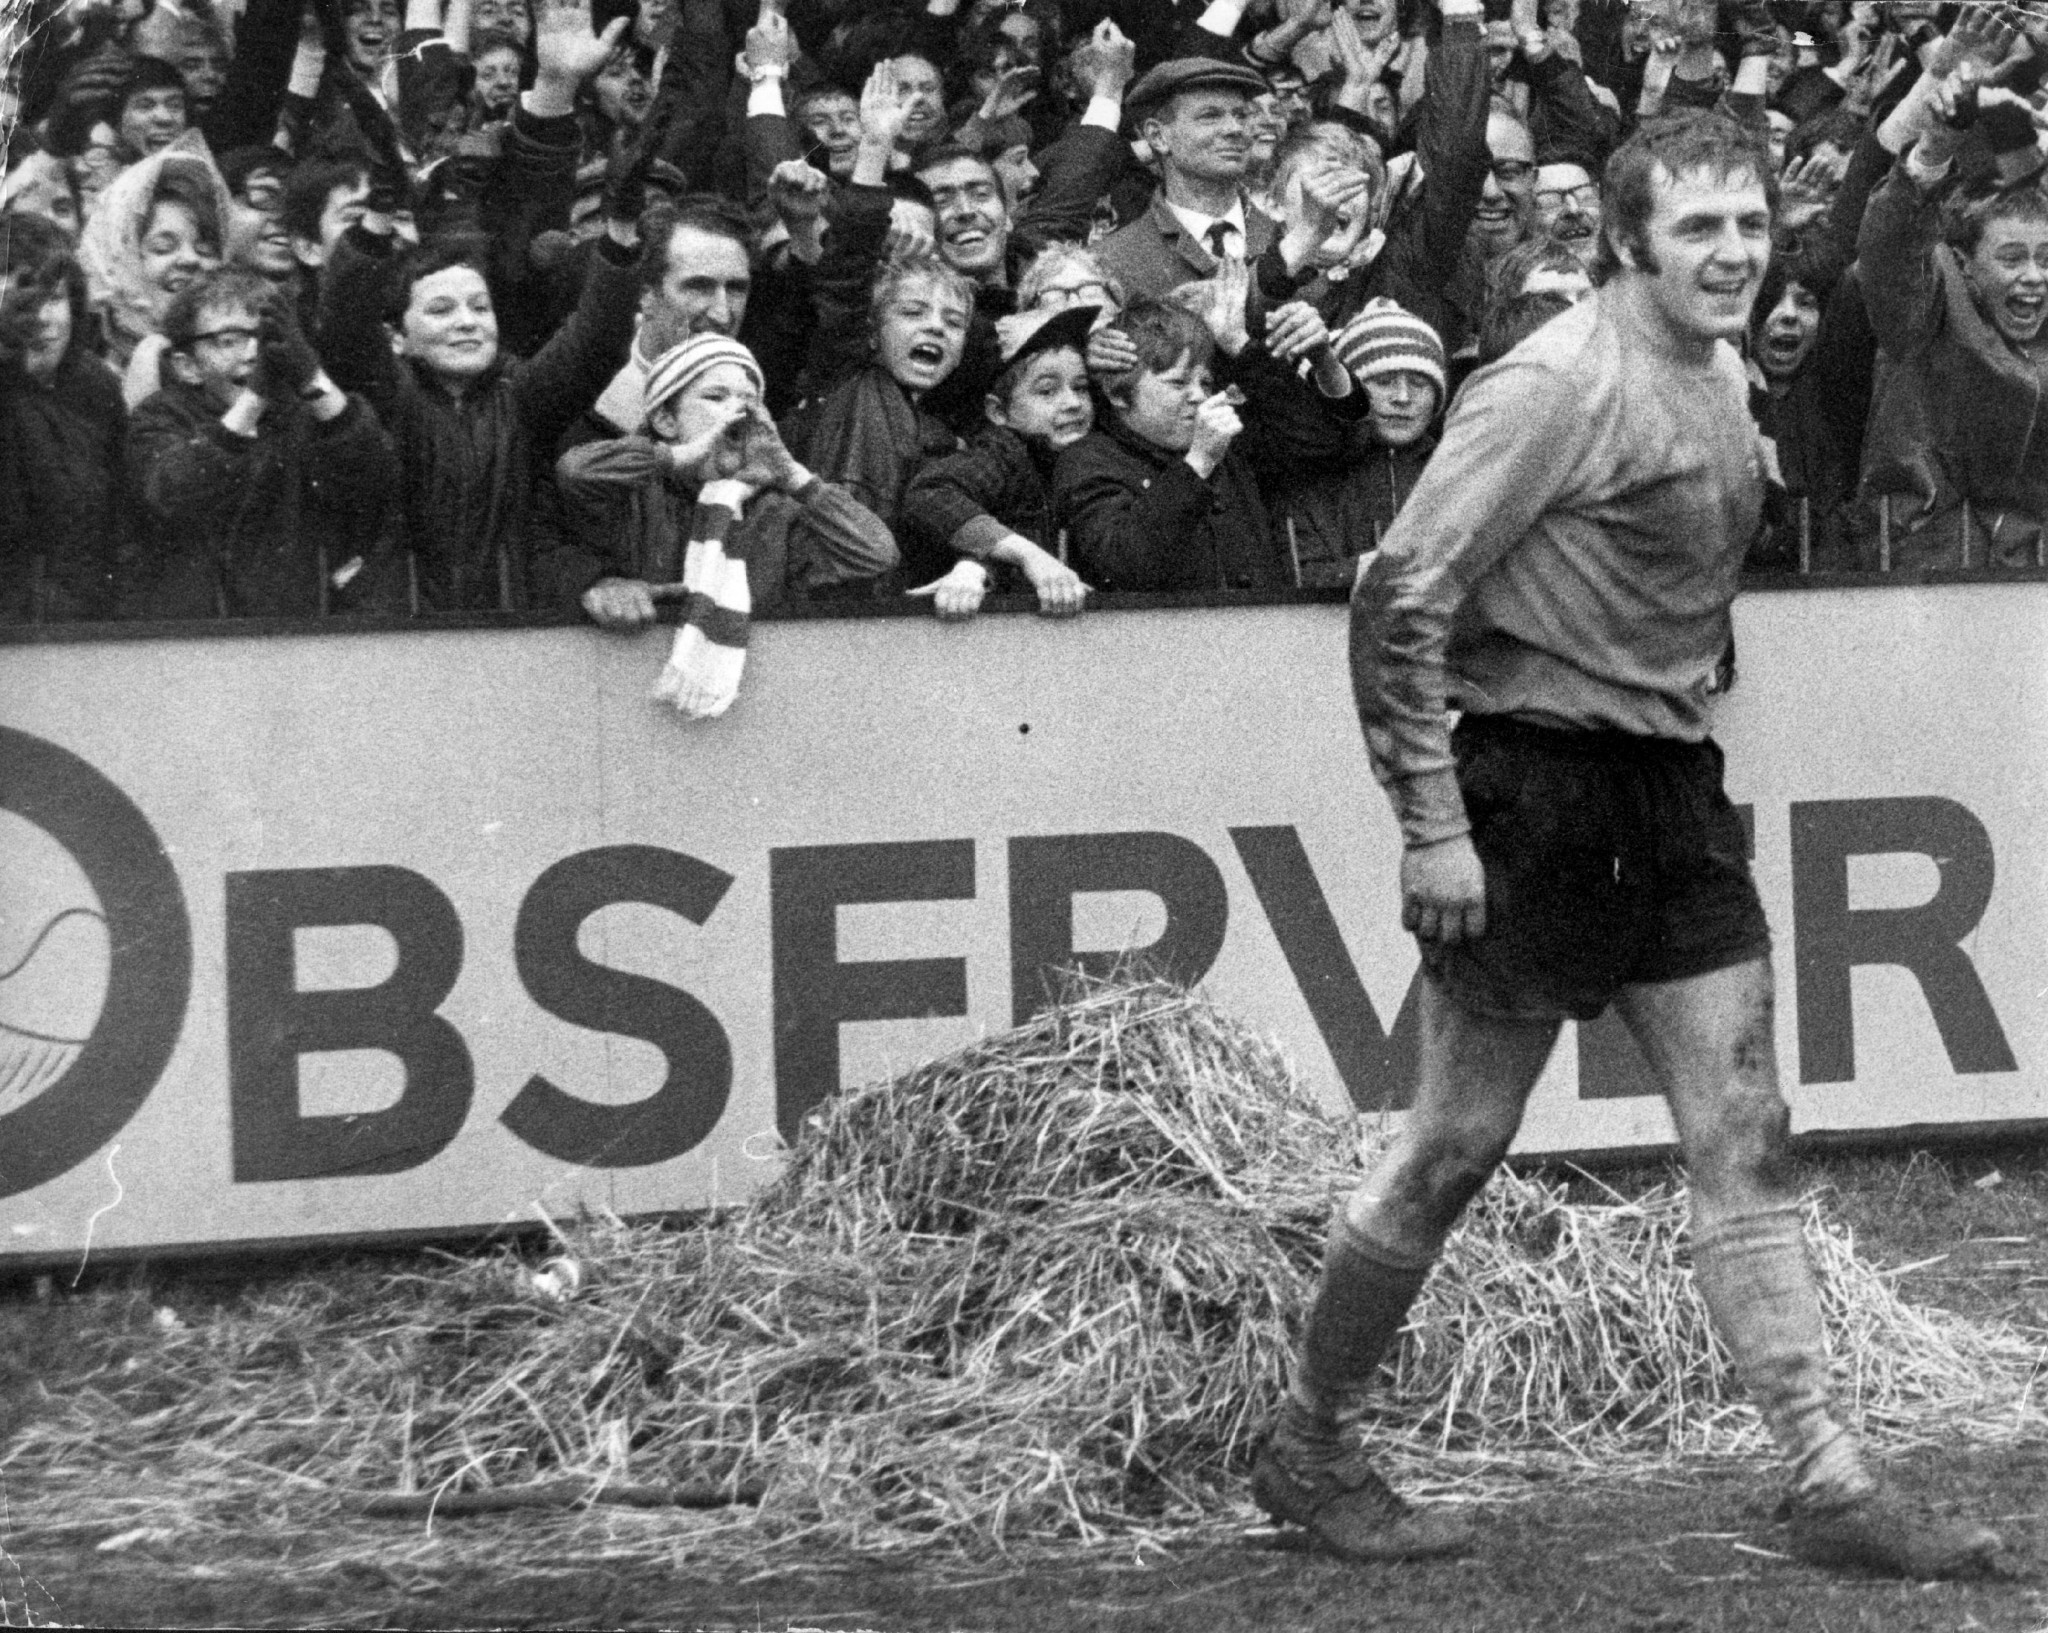 Watford's Barry Endean, among others, celebrates the goal which earned his side a victory over Liverpool in a 1969-1970 FA Cup quarter-final ©Getty Images